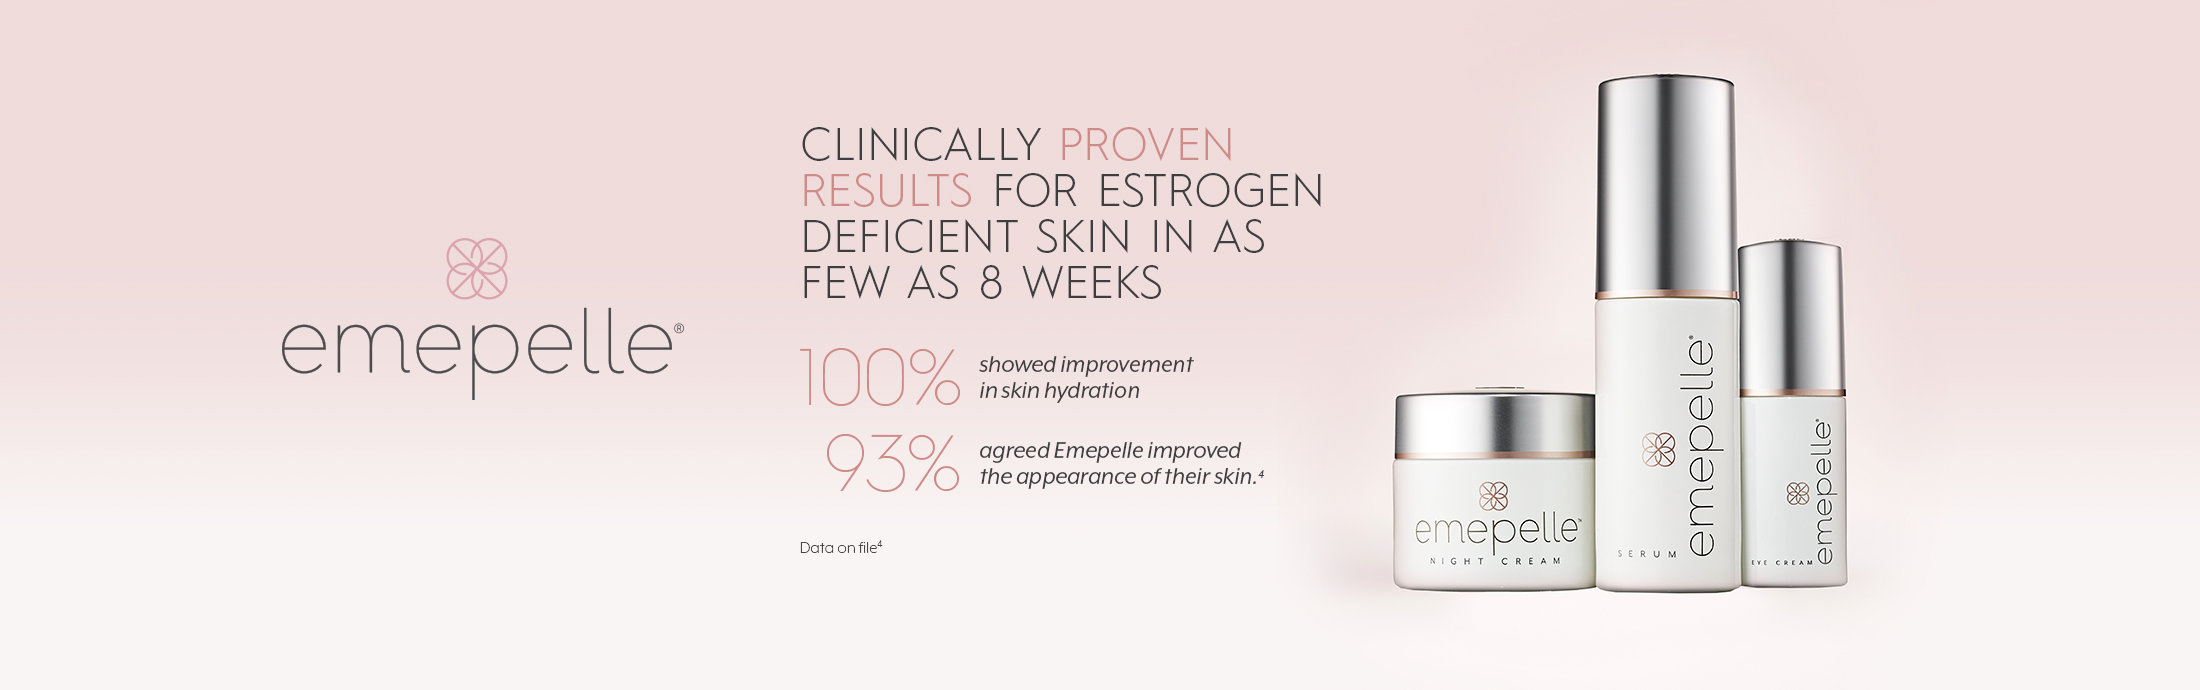 Emepelle. Clinically Proven results for estrogen deficient skin is an few as 8 weeks. 100% showed improvement in skin hydration.  93% agreed Emepelle improved the appearance of their skin. 